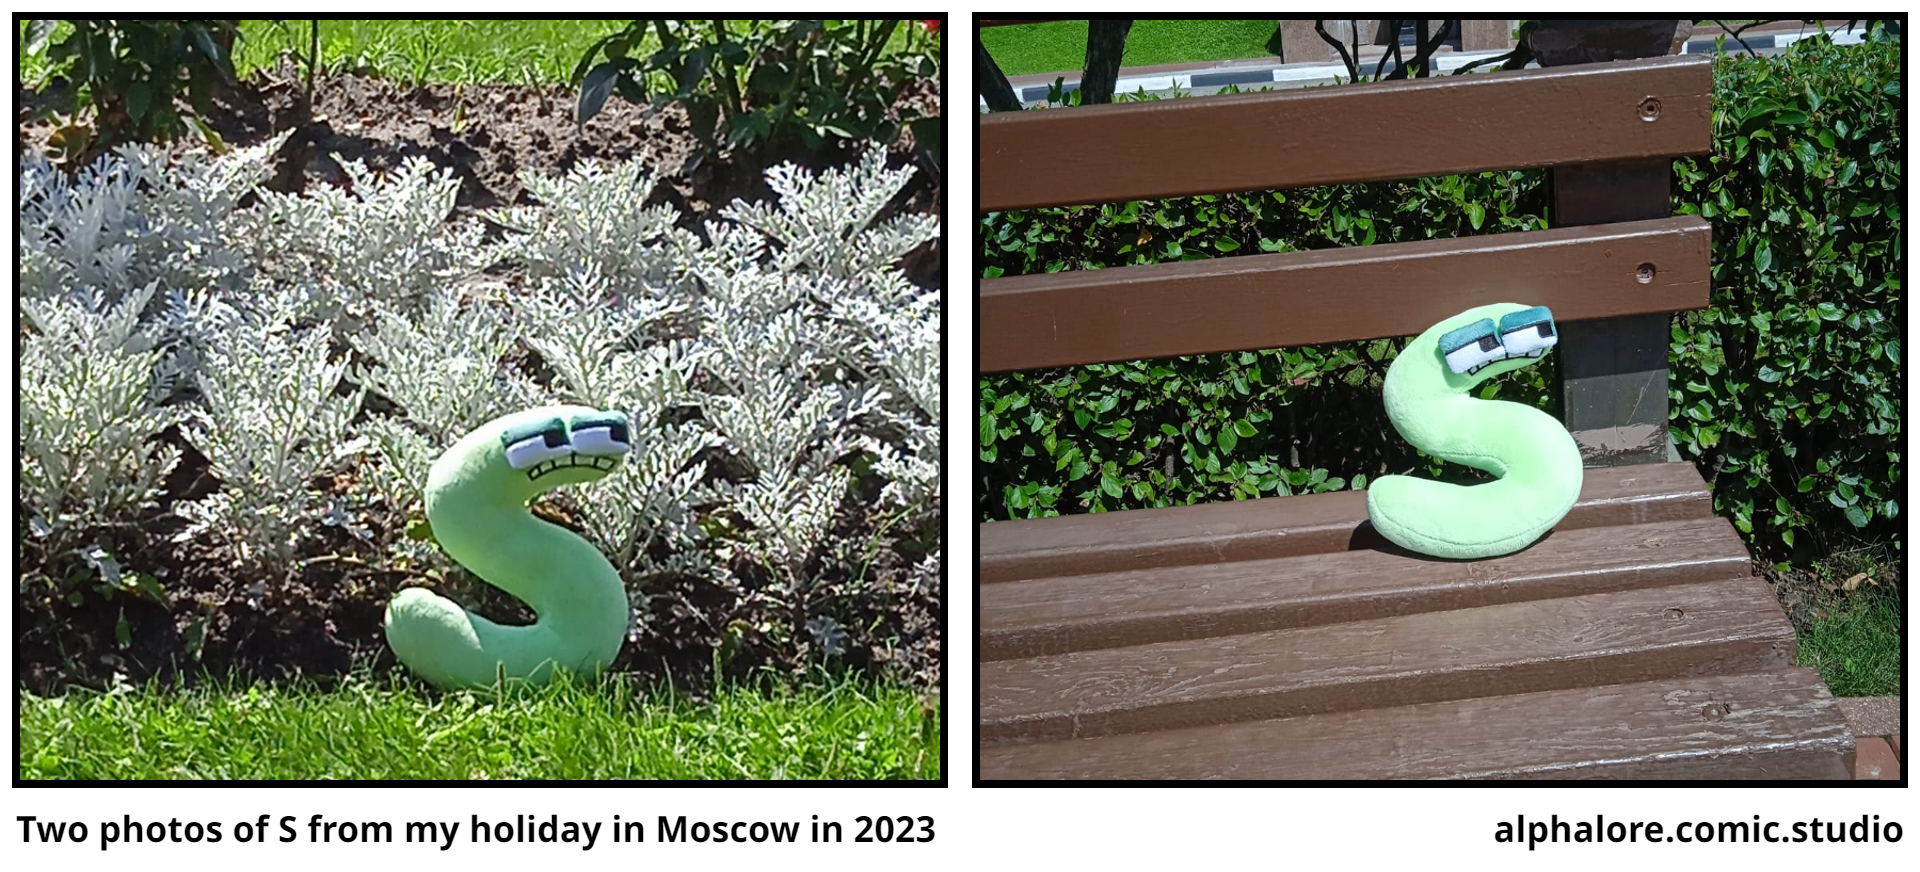 Two photos of S from my holiday in Moscow in 2023